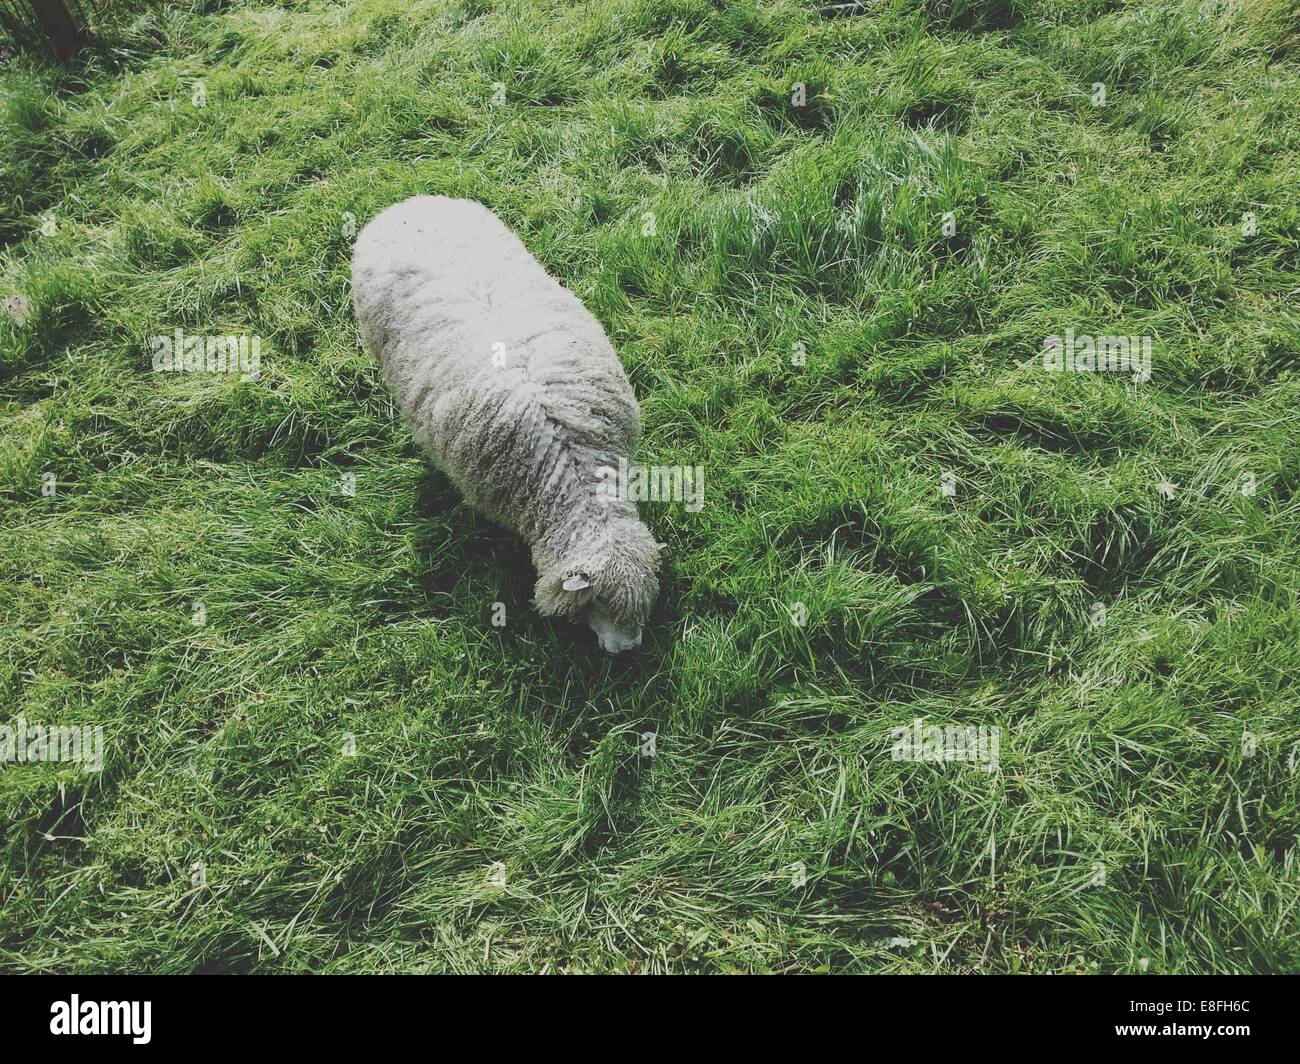 Overhead view of a sheep in a field Stock Photo